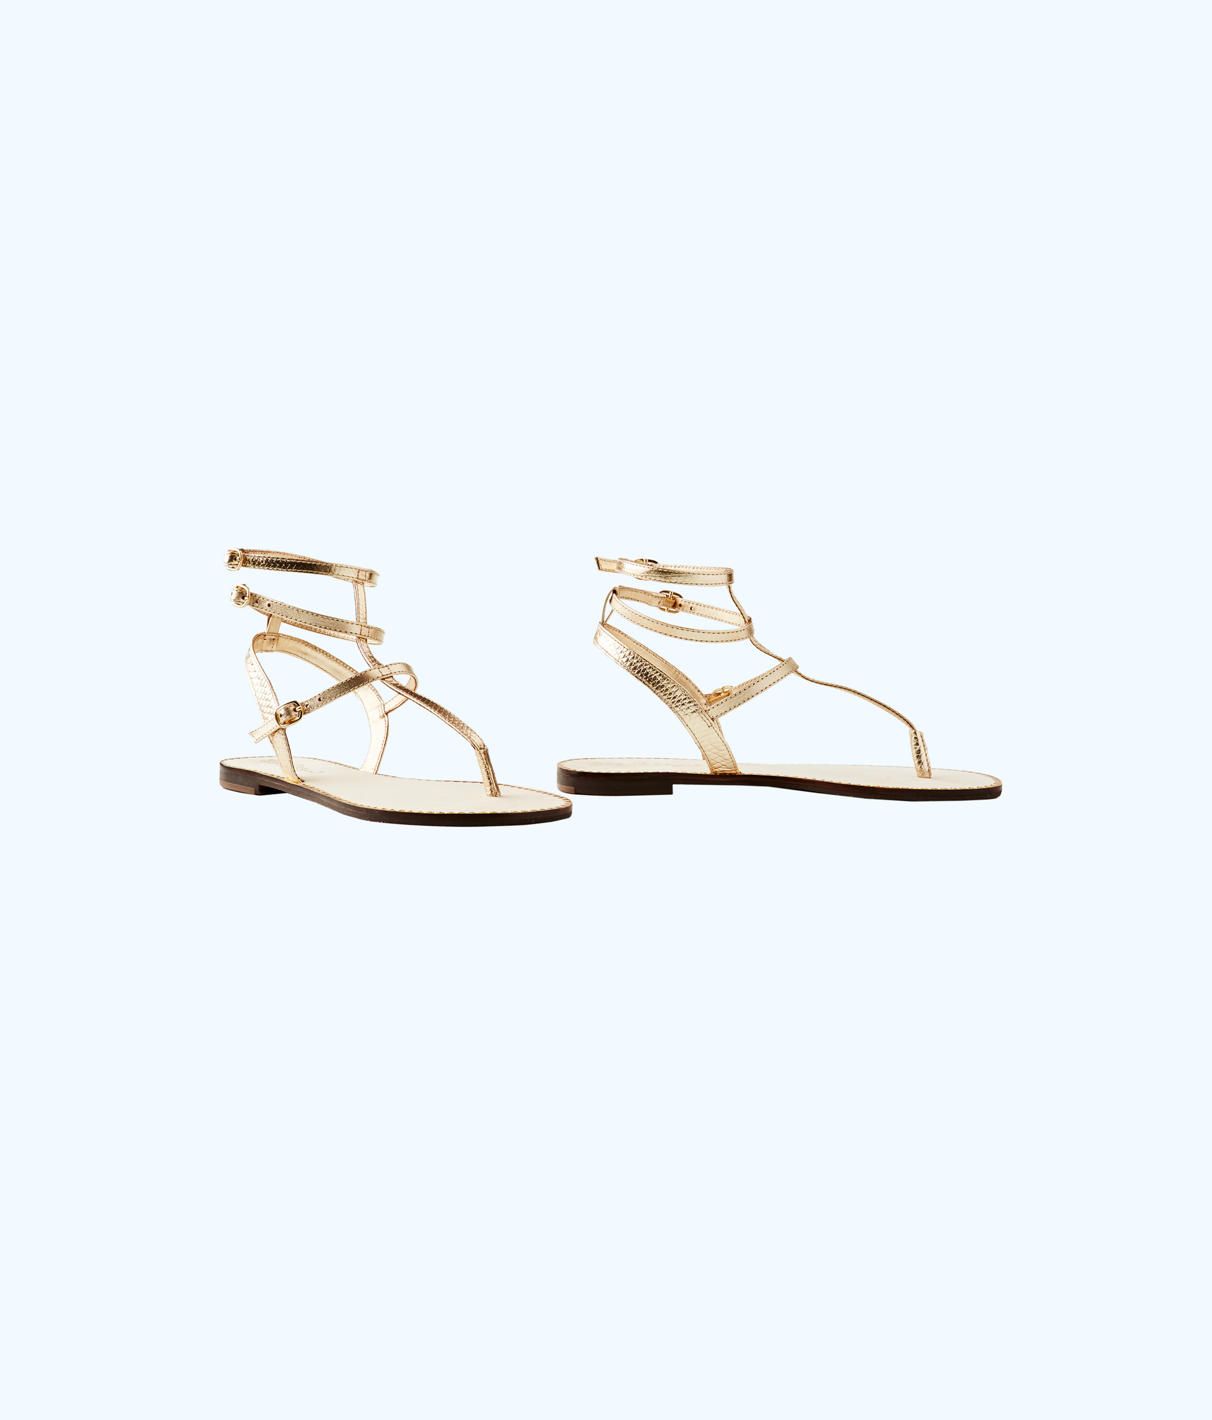 Lilly Pulitzer Lilly Pulitzer Womens Gemma Sandal | Lilly Pulitzer